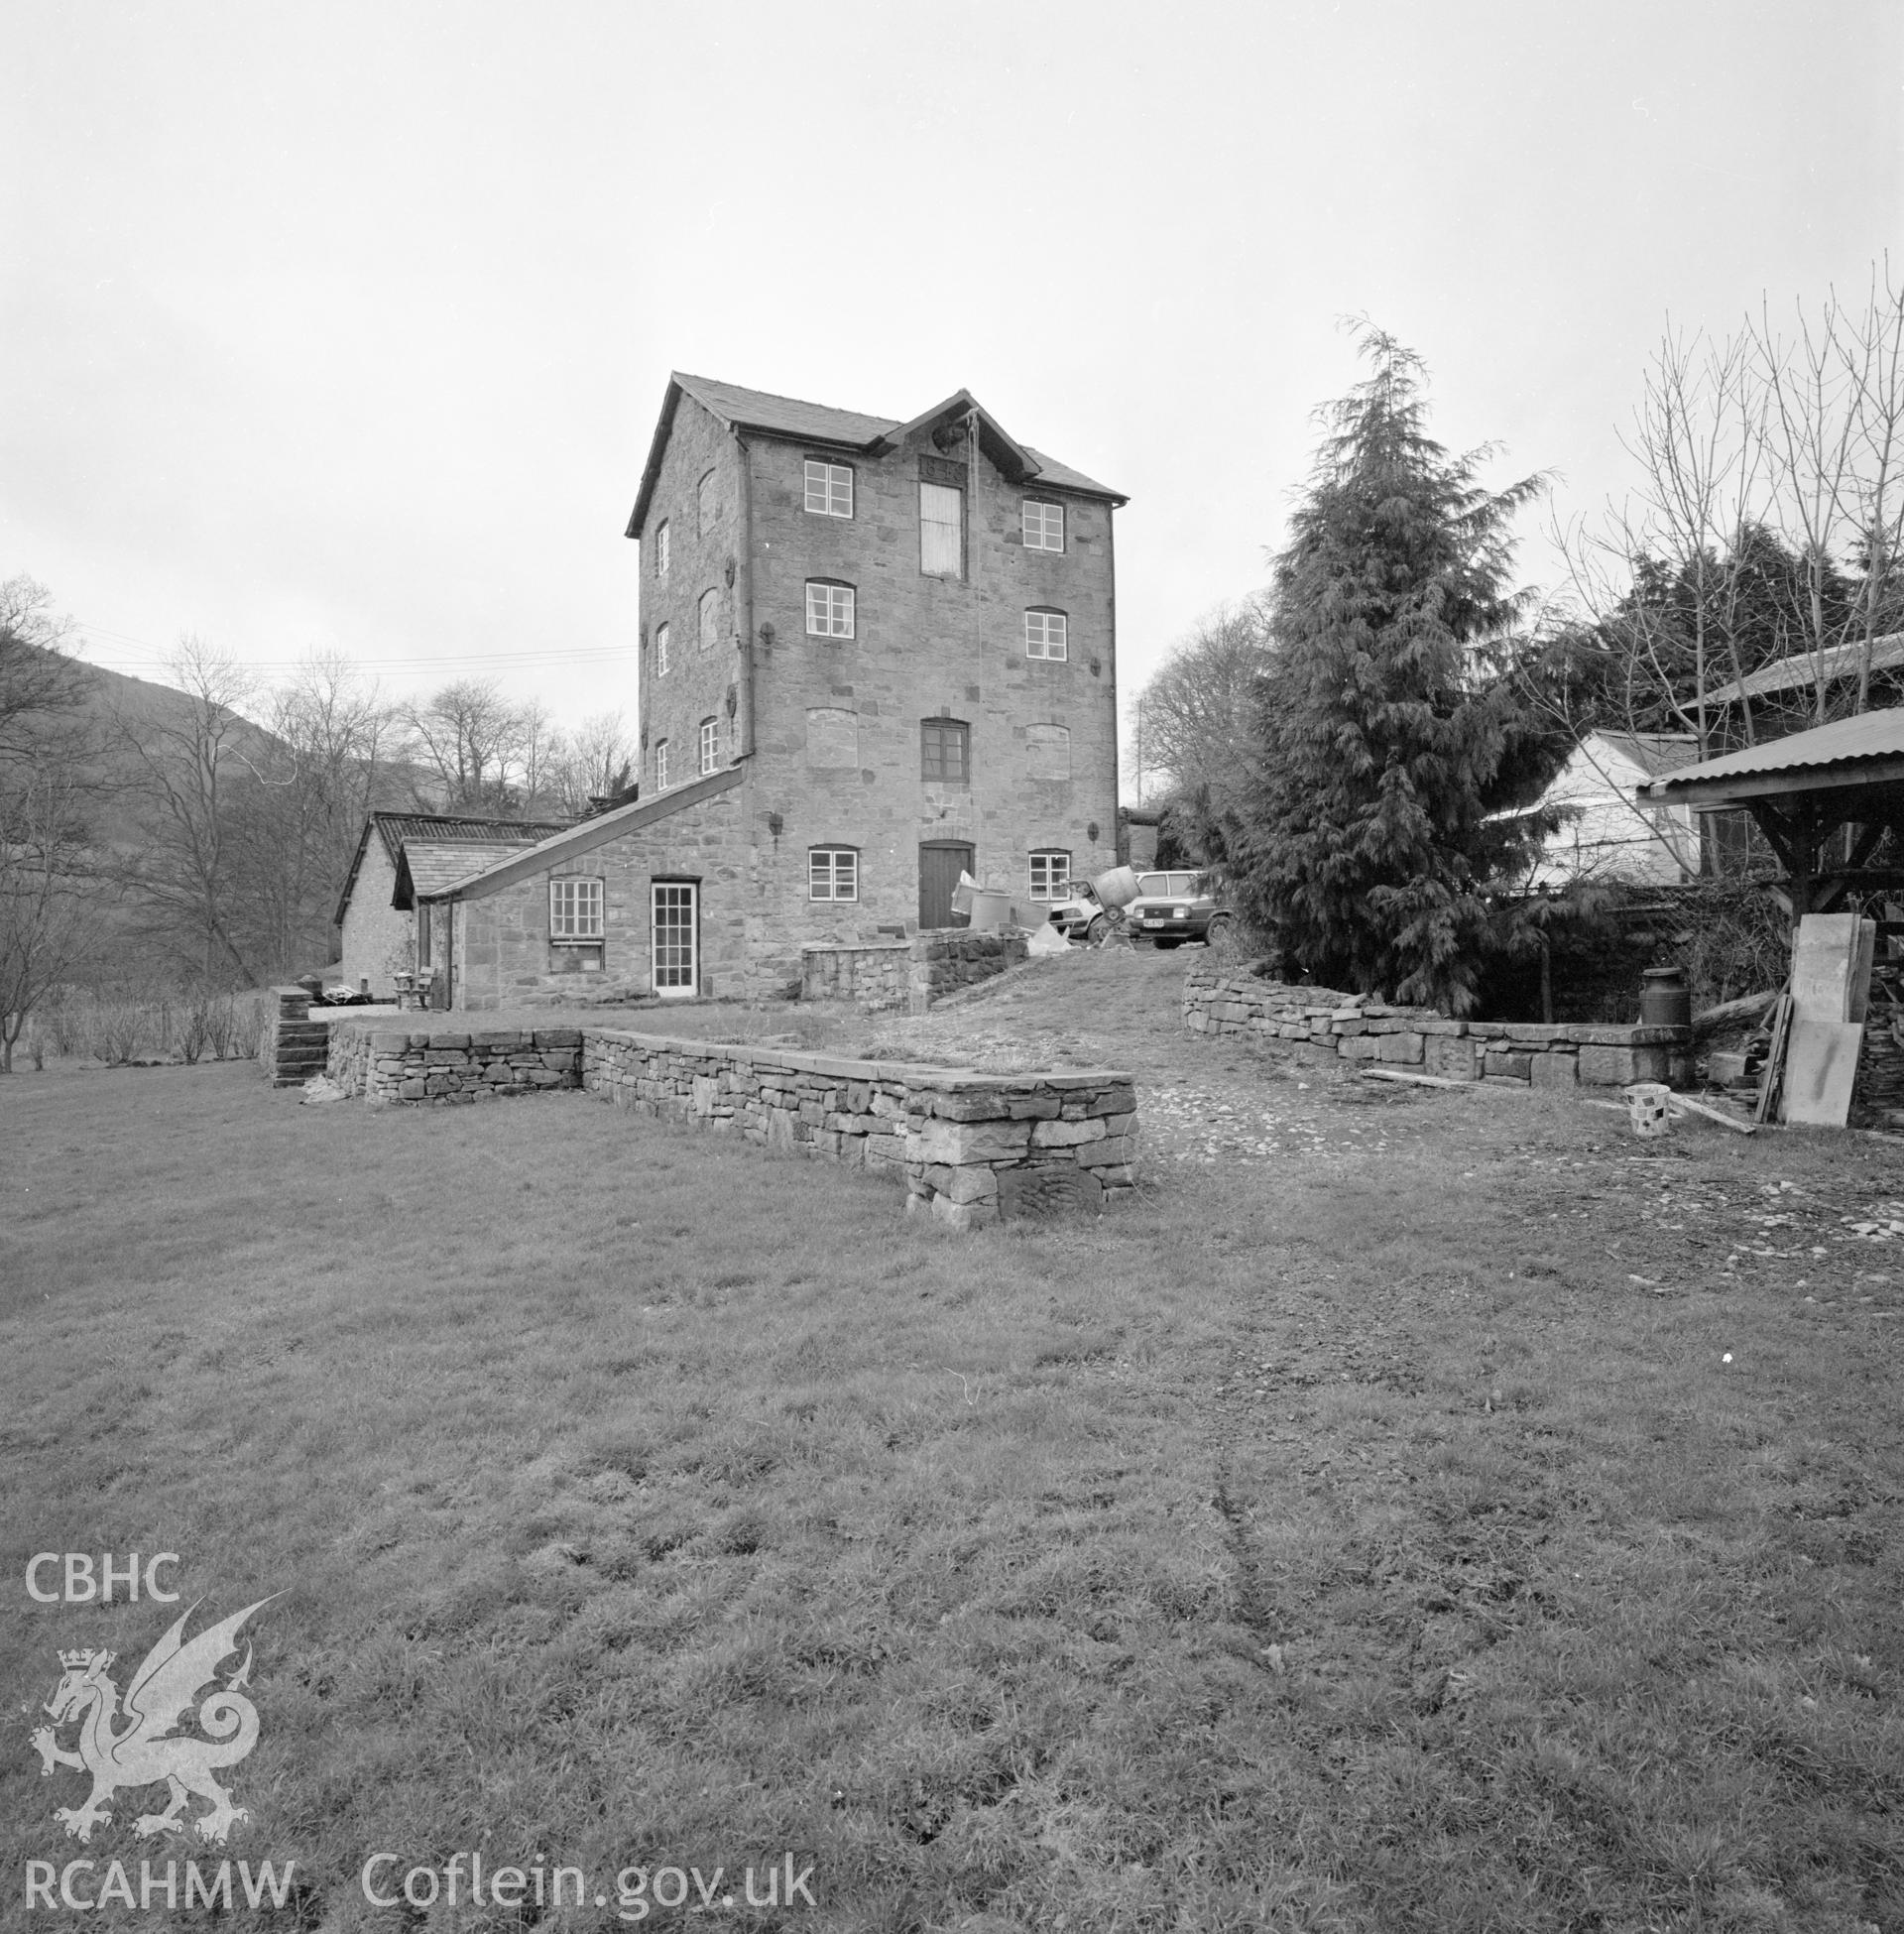 Digital copy of a black and white negative showing exterior view of Trevor Old Mill taken by RCAHMW, 1987.